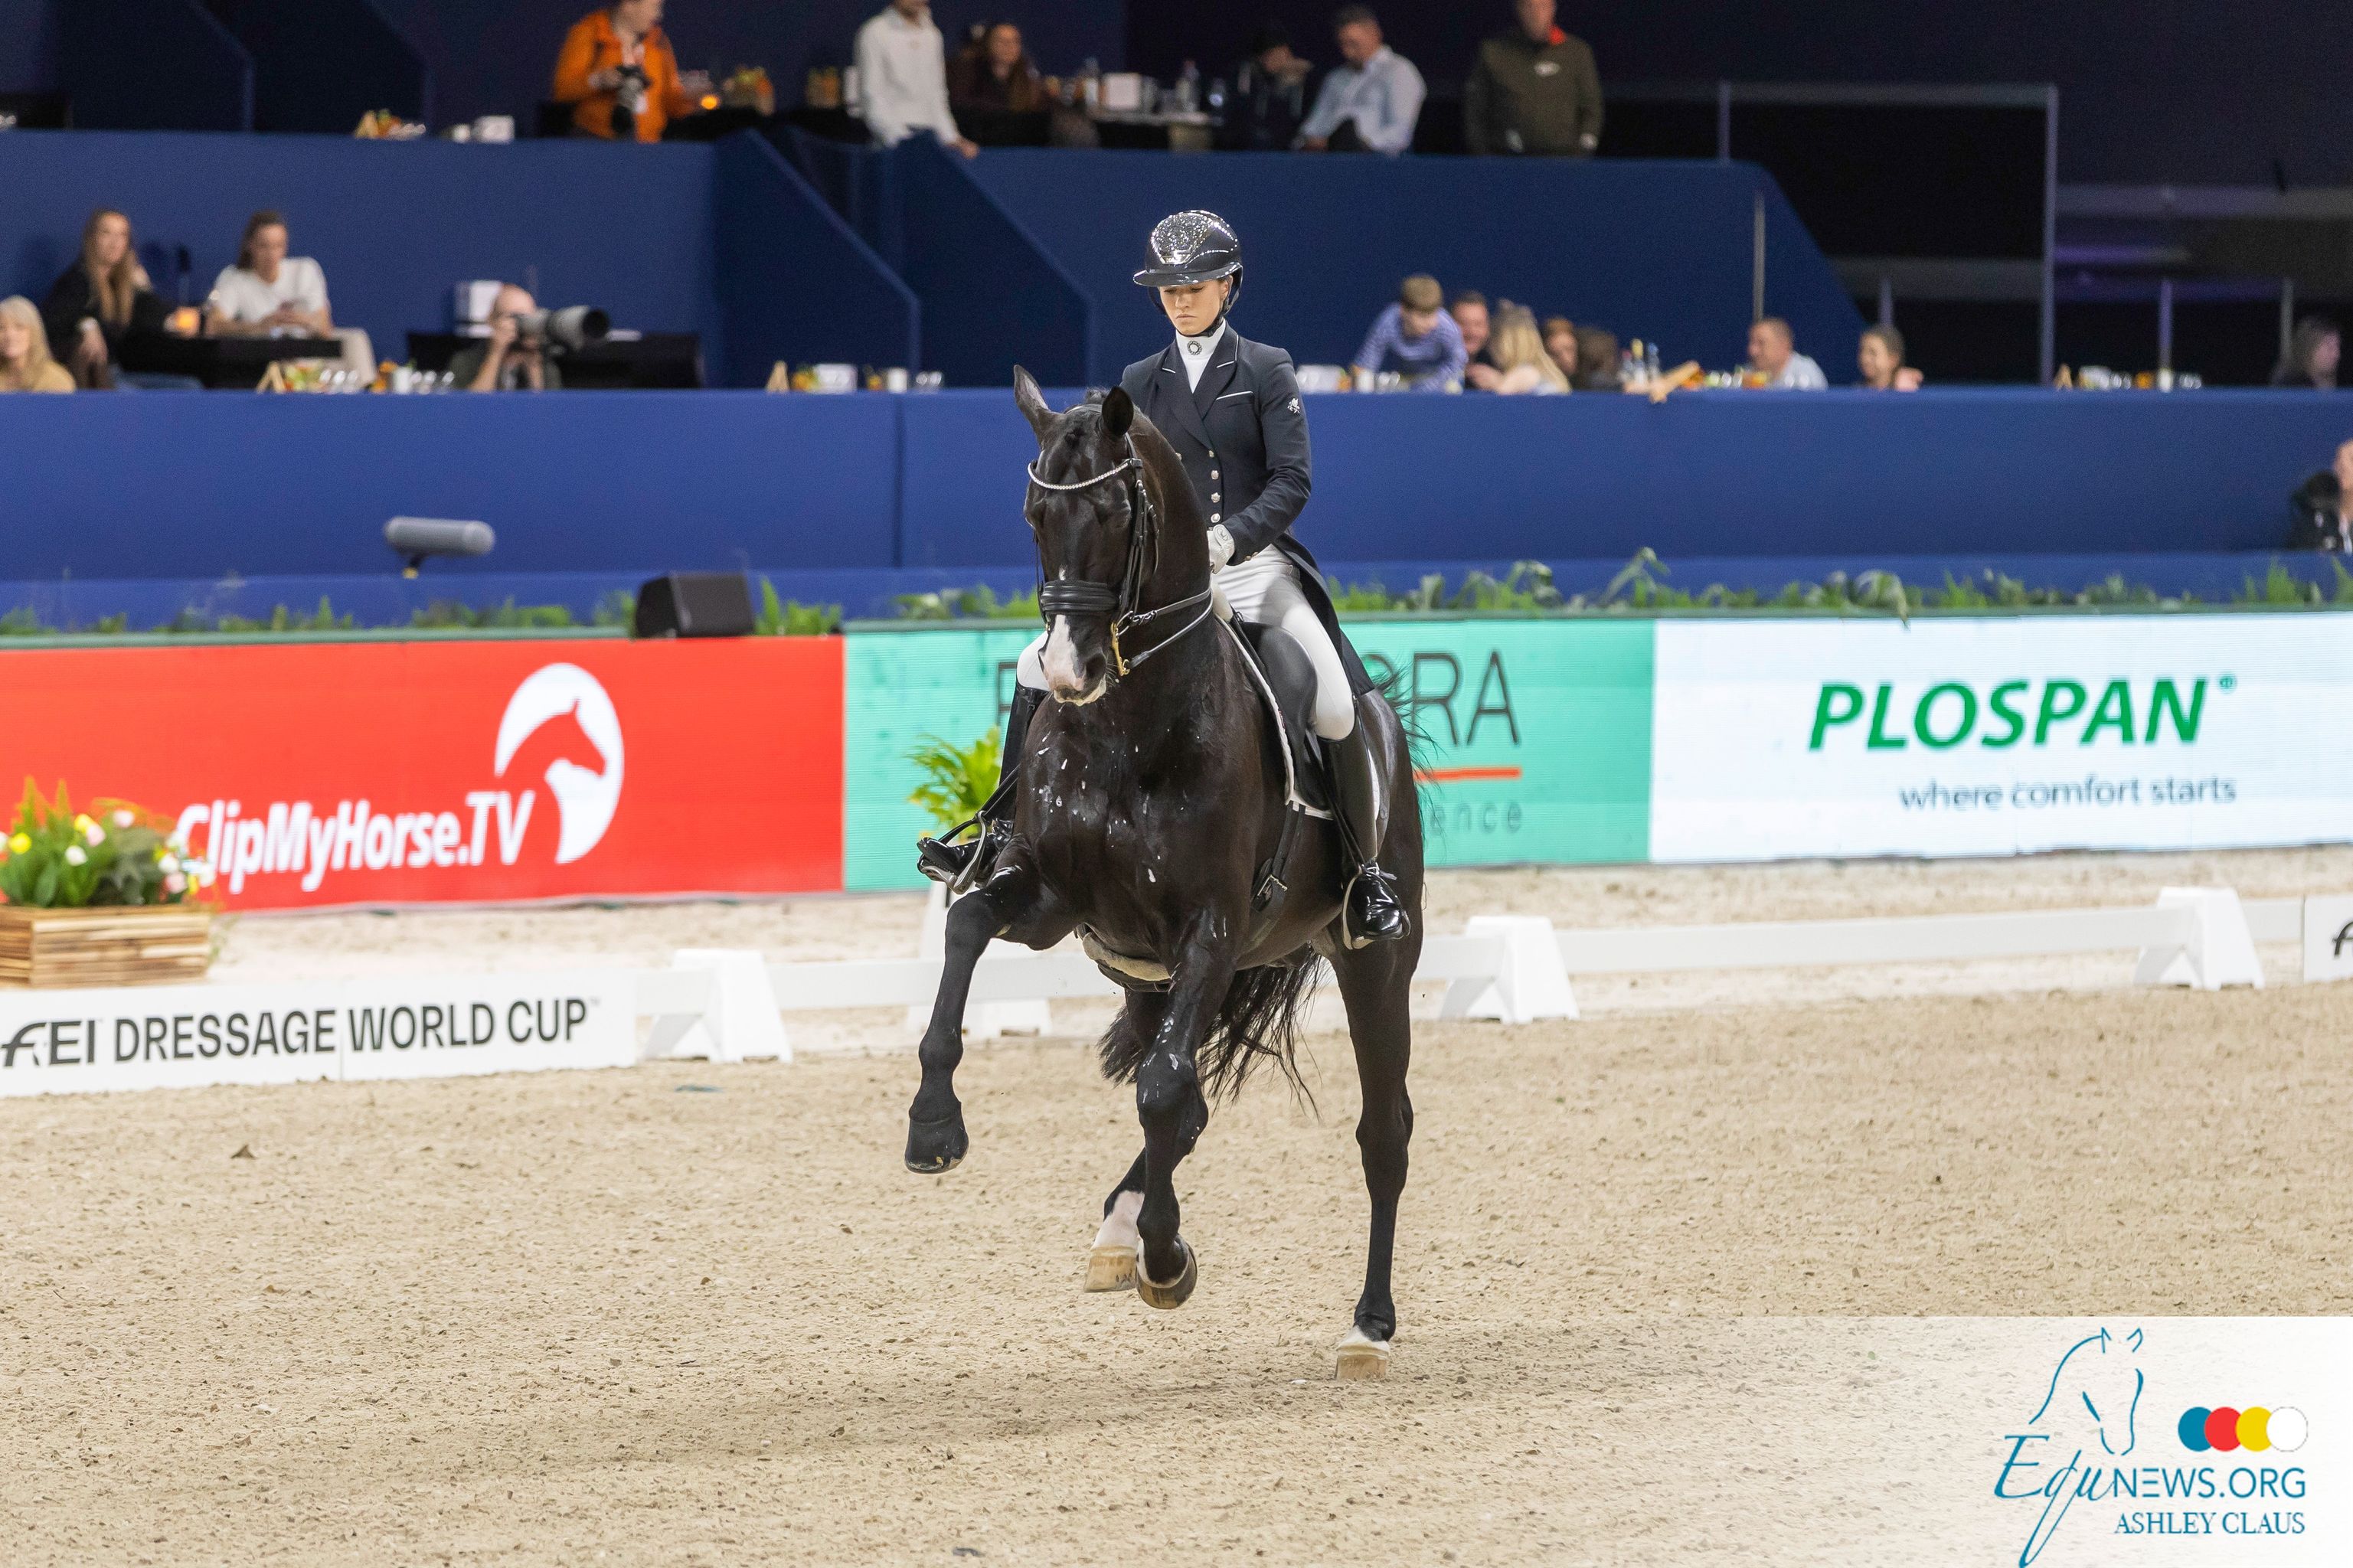 Charlotte Fry and Everdale take victory in FEI Dressage World Cup Grand Prix of Amsterdam